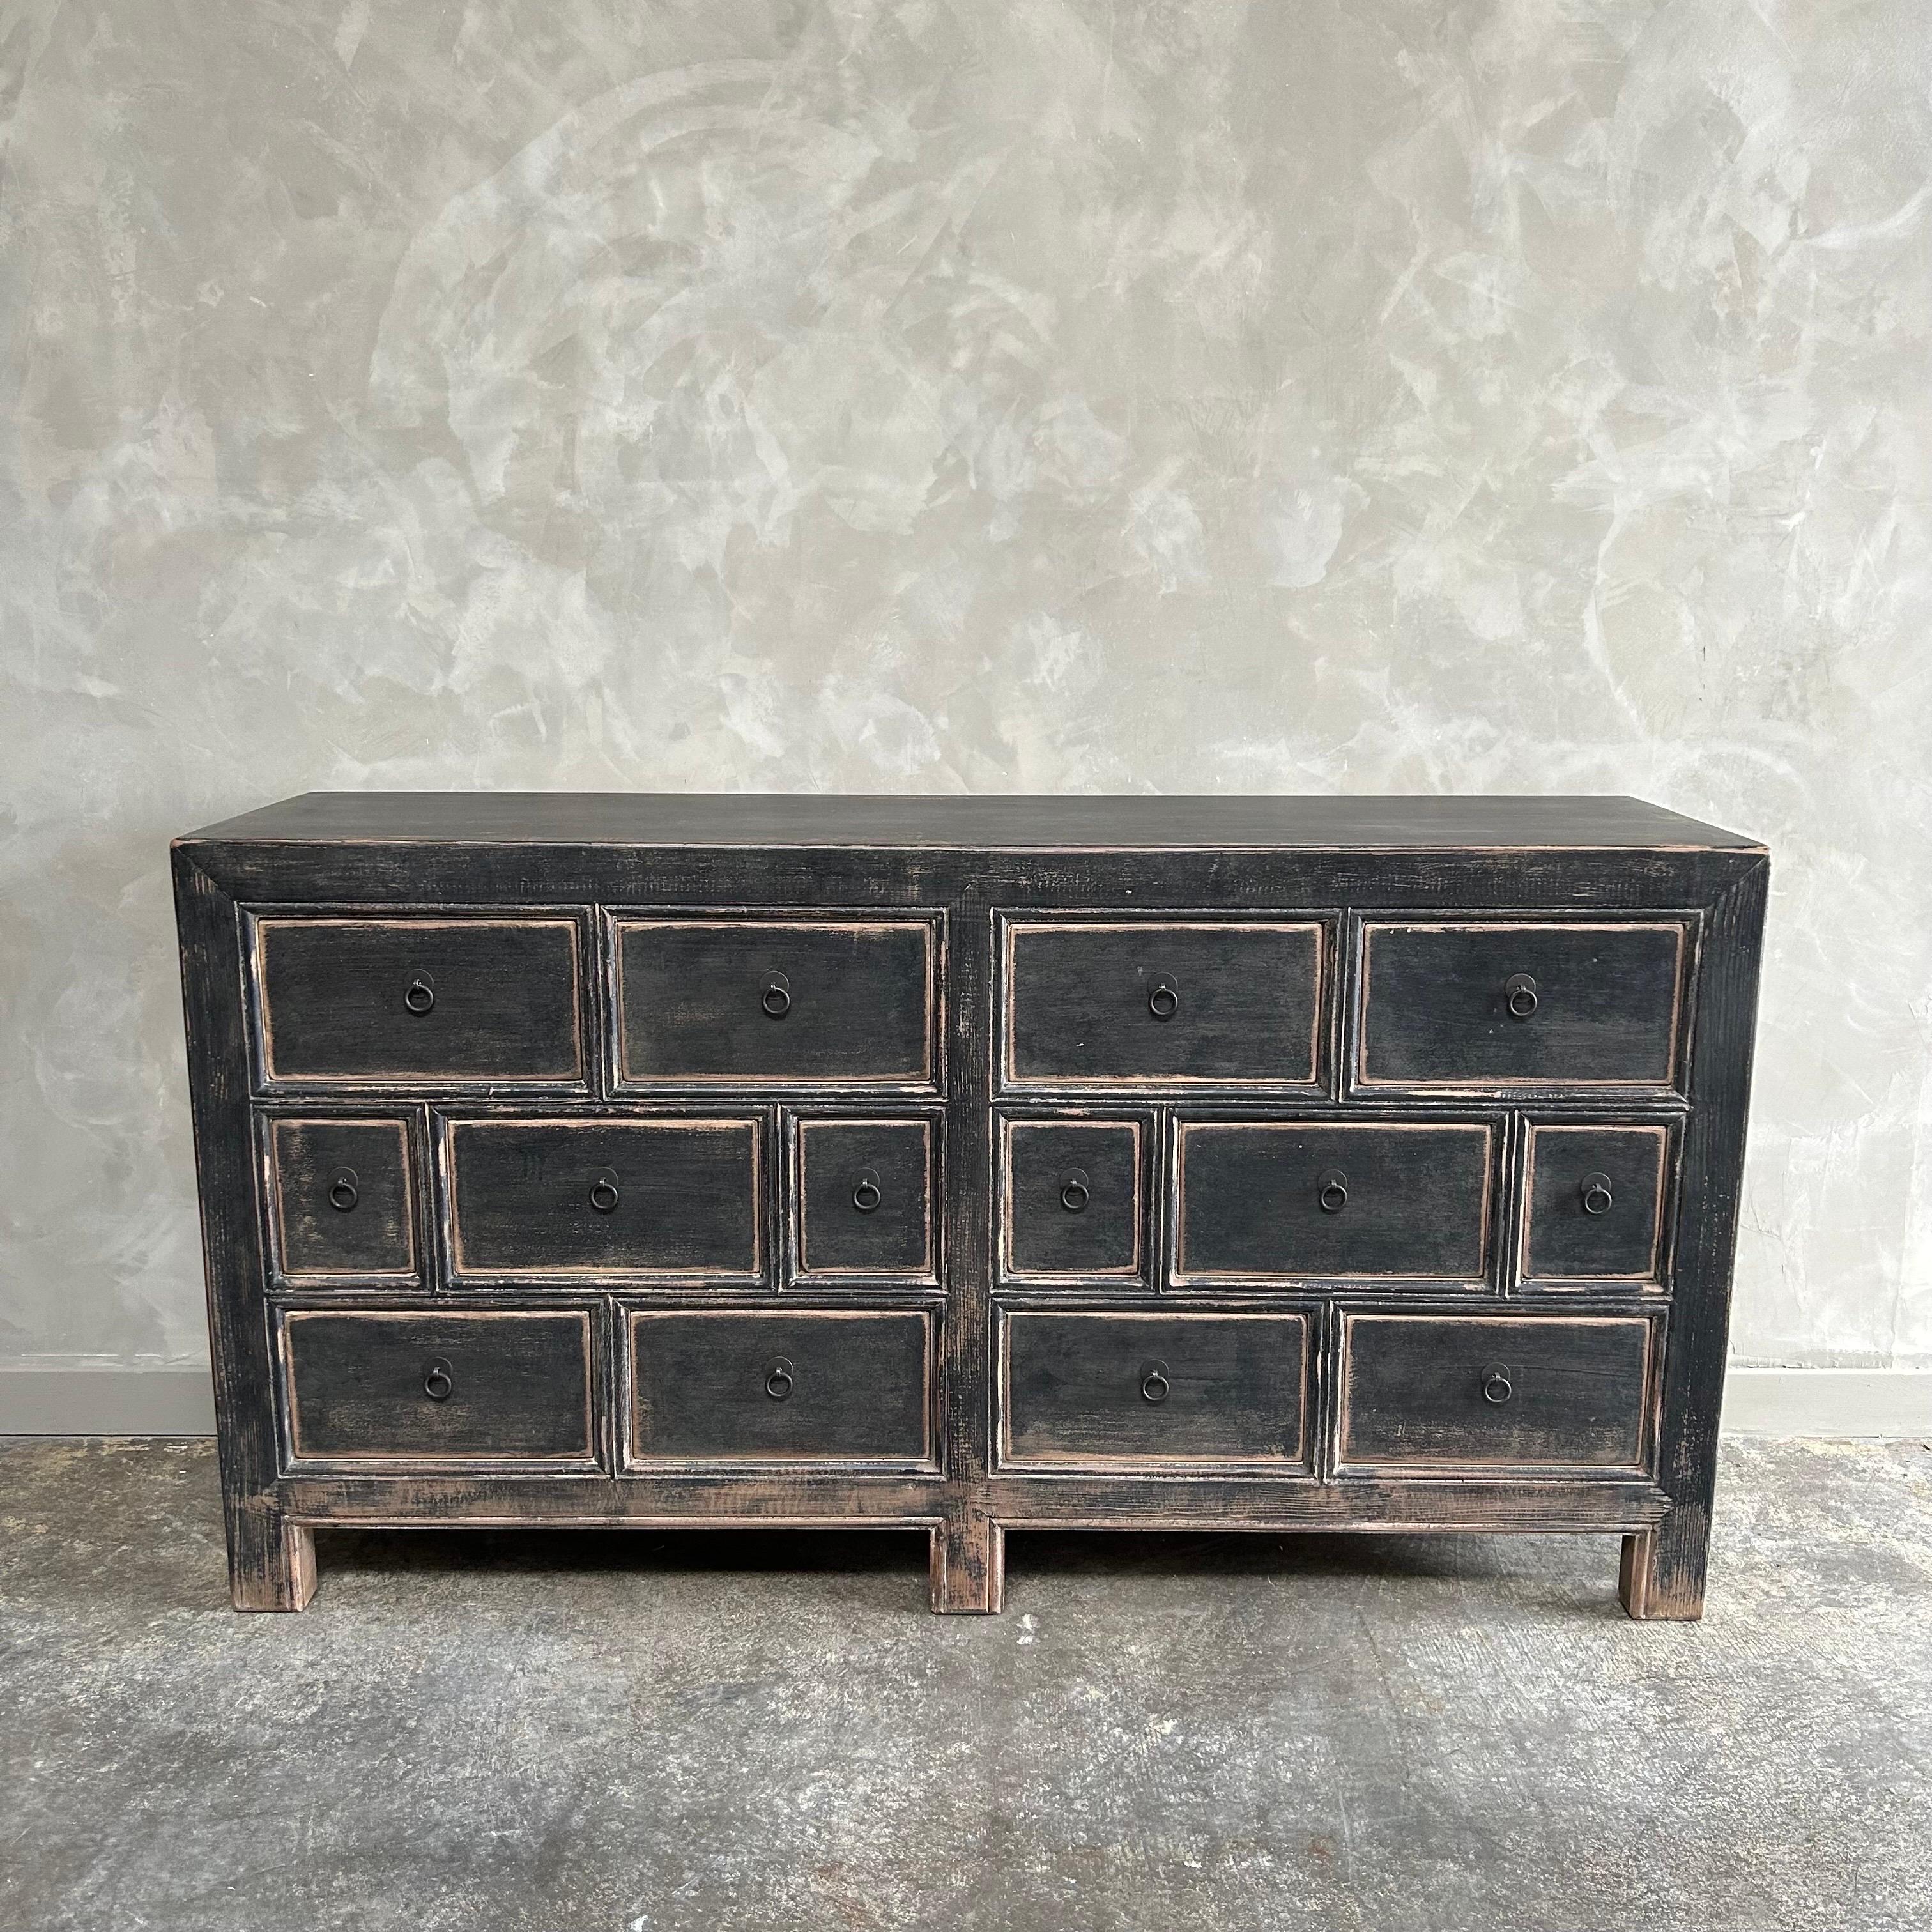 Vintage Style Reclaimed Wood Black Painted Chest of Drawers In New Condition For Sale In Brea, CA